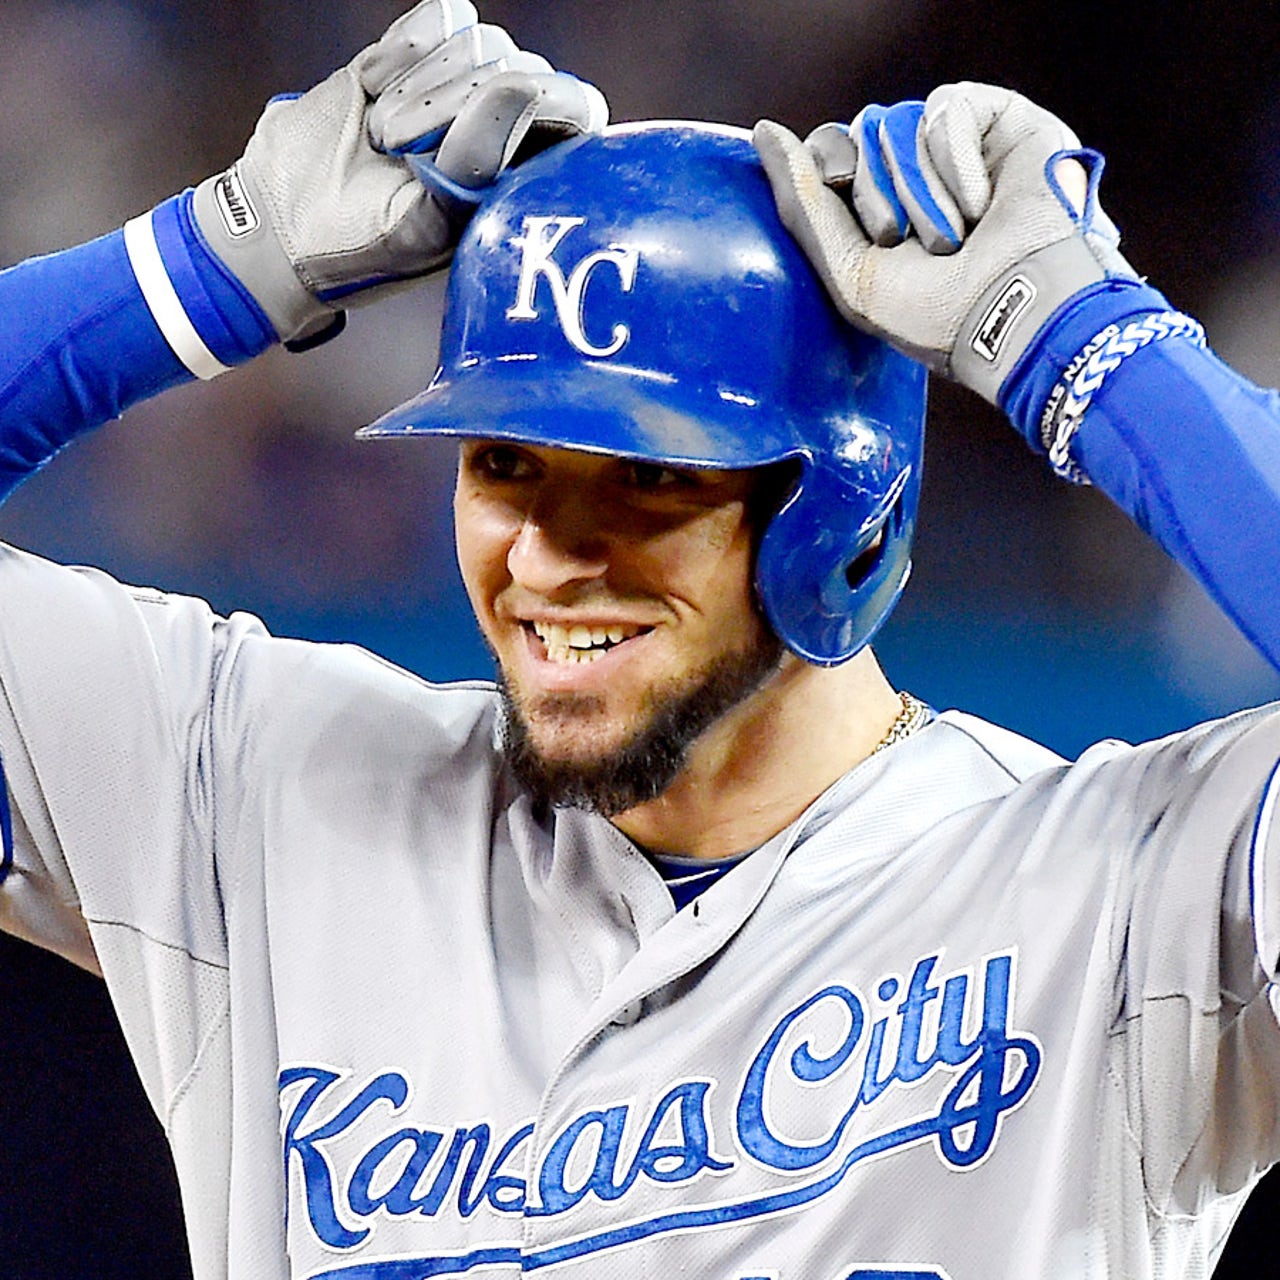 Paulo Orlando has Brazil cheering for Royals in World Series